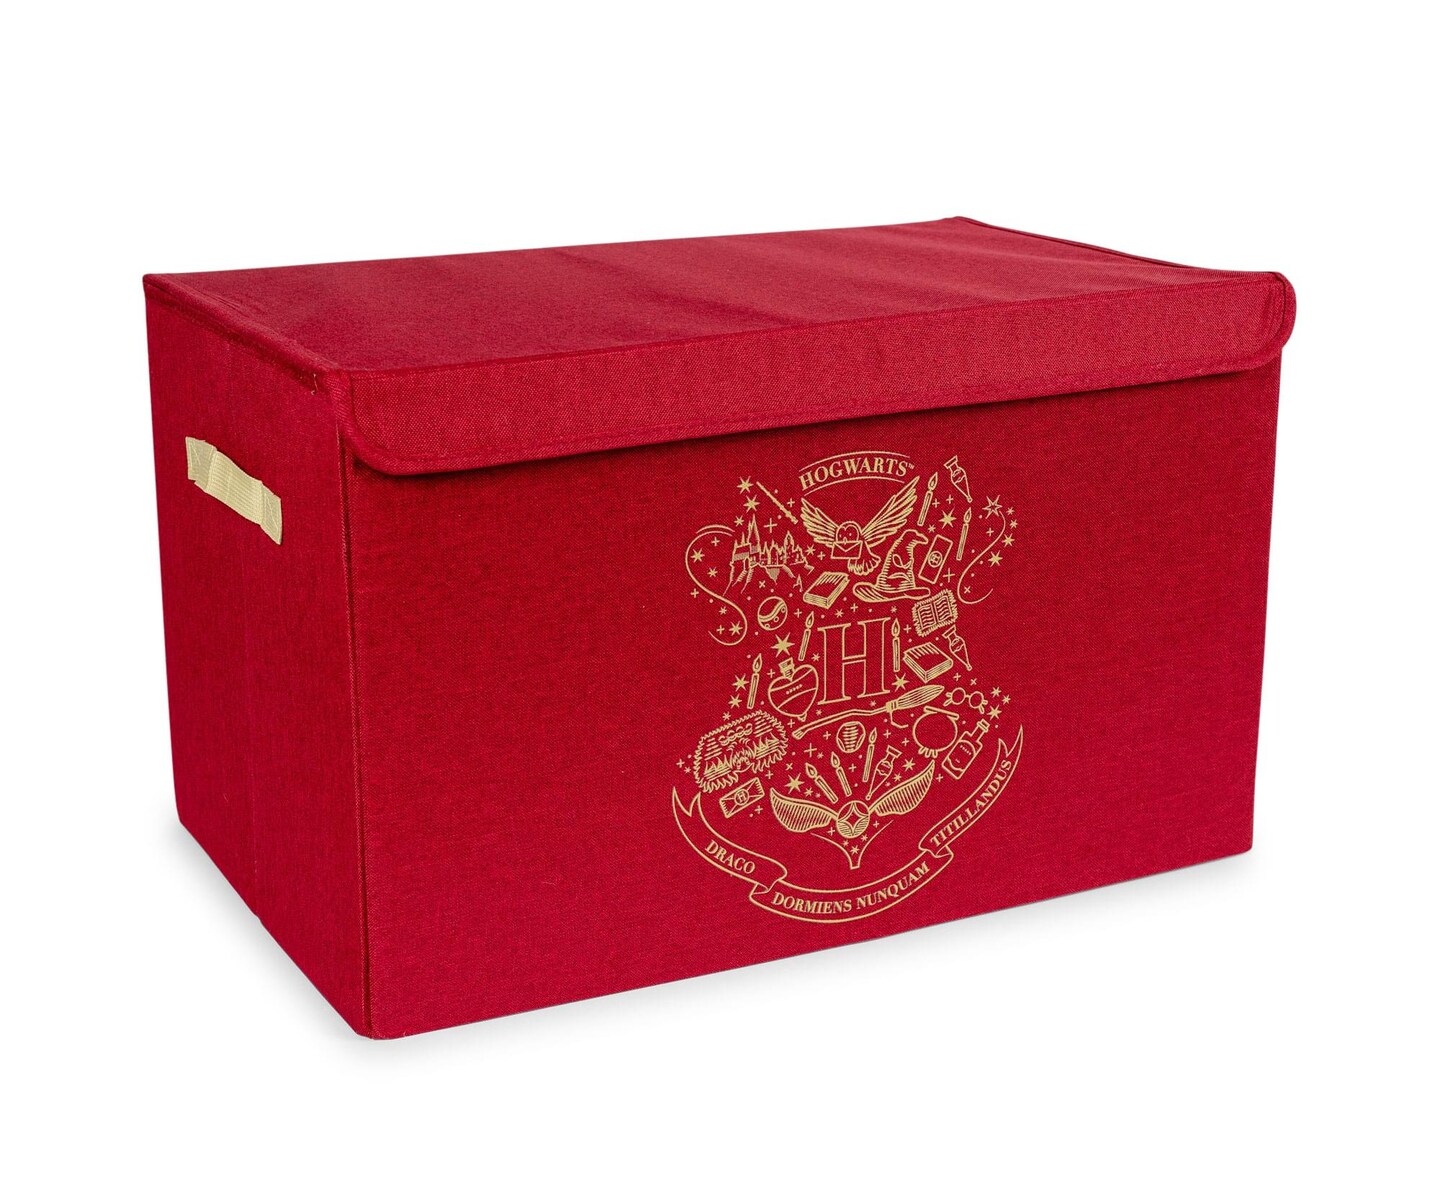 Harry Potter Hogwarts Collapsible Storage Bin Organizer with Lid | 15 x 24 Inches